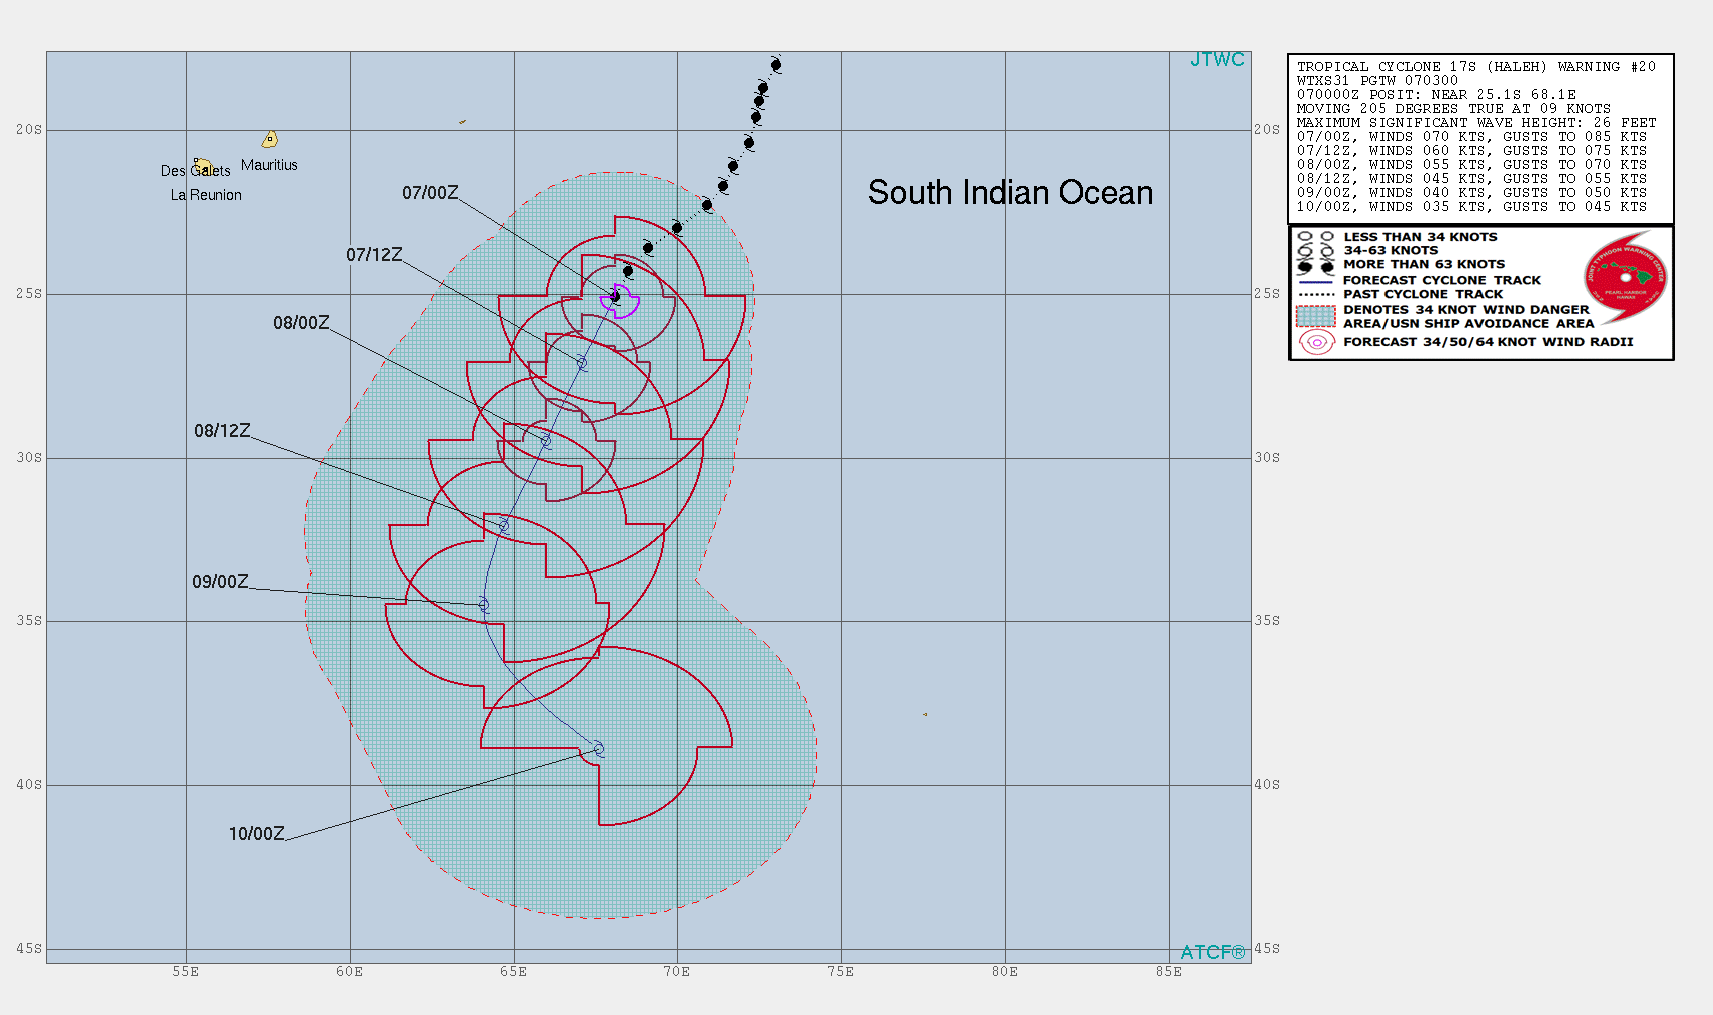 03UTC: Cyclone HALEH(17S) category 1 US, weakening and becoming extratropical in 36hours